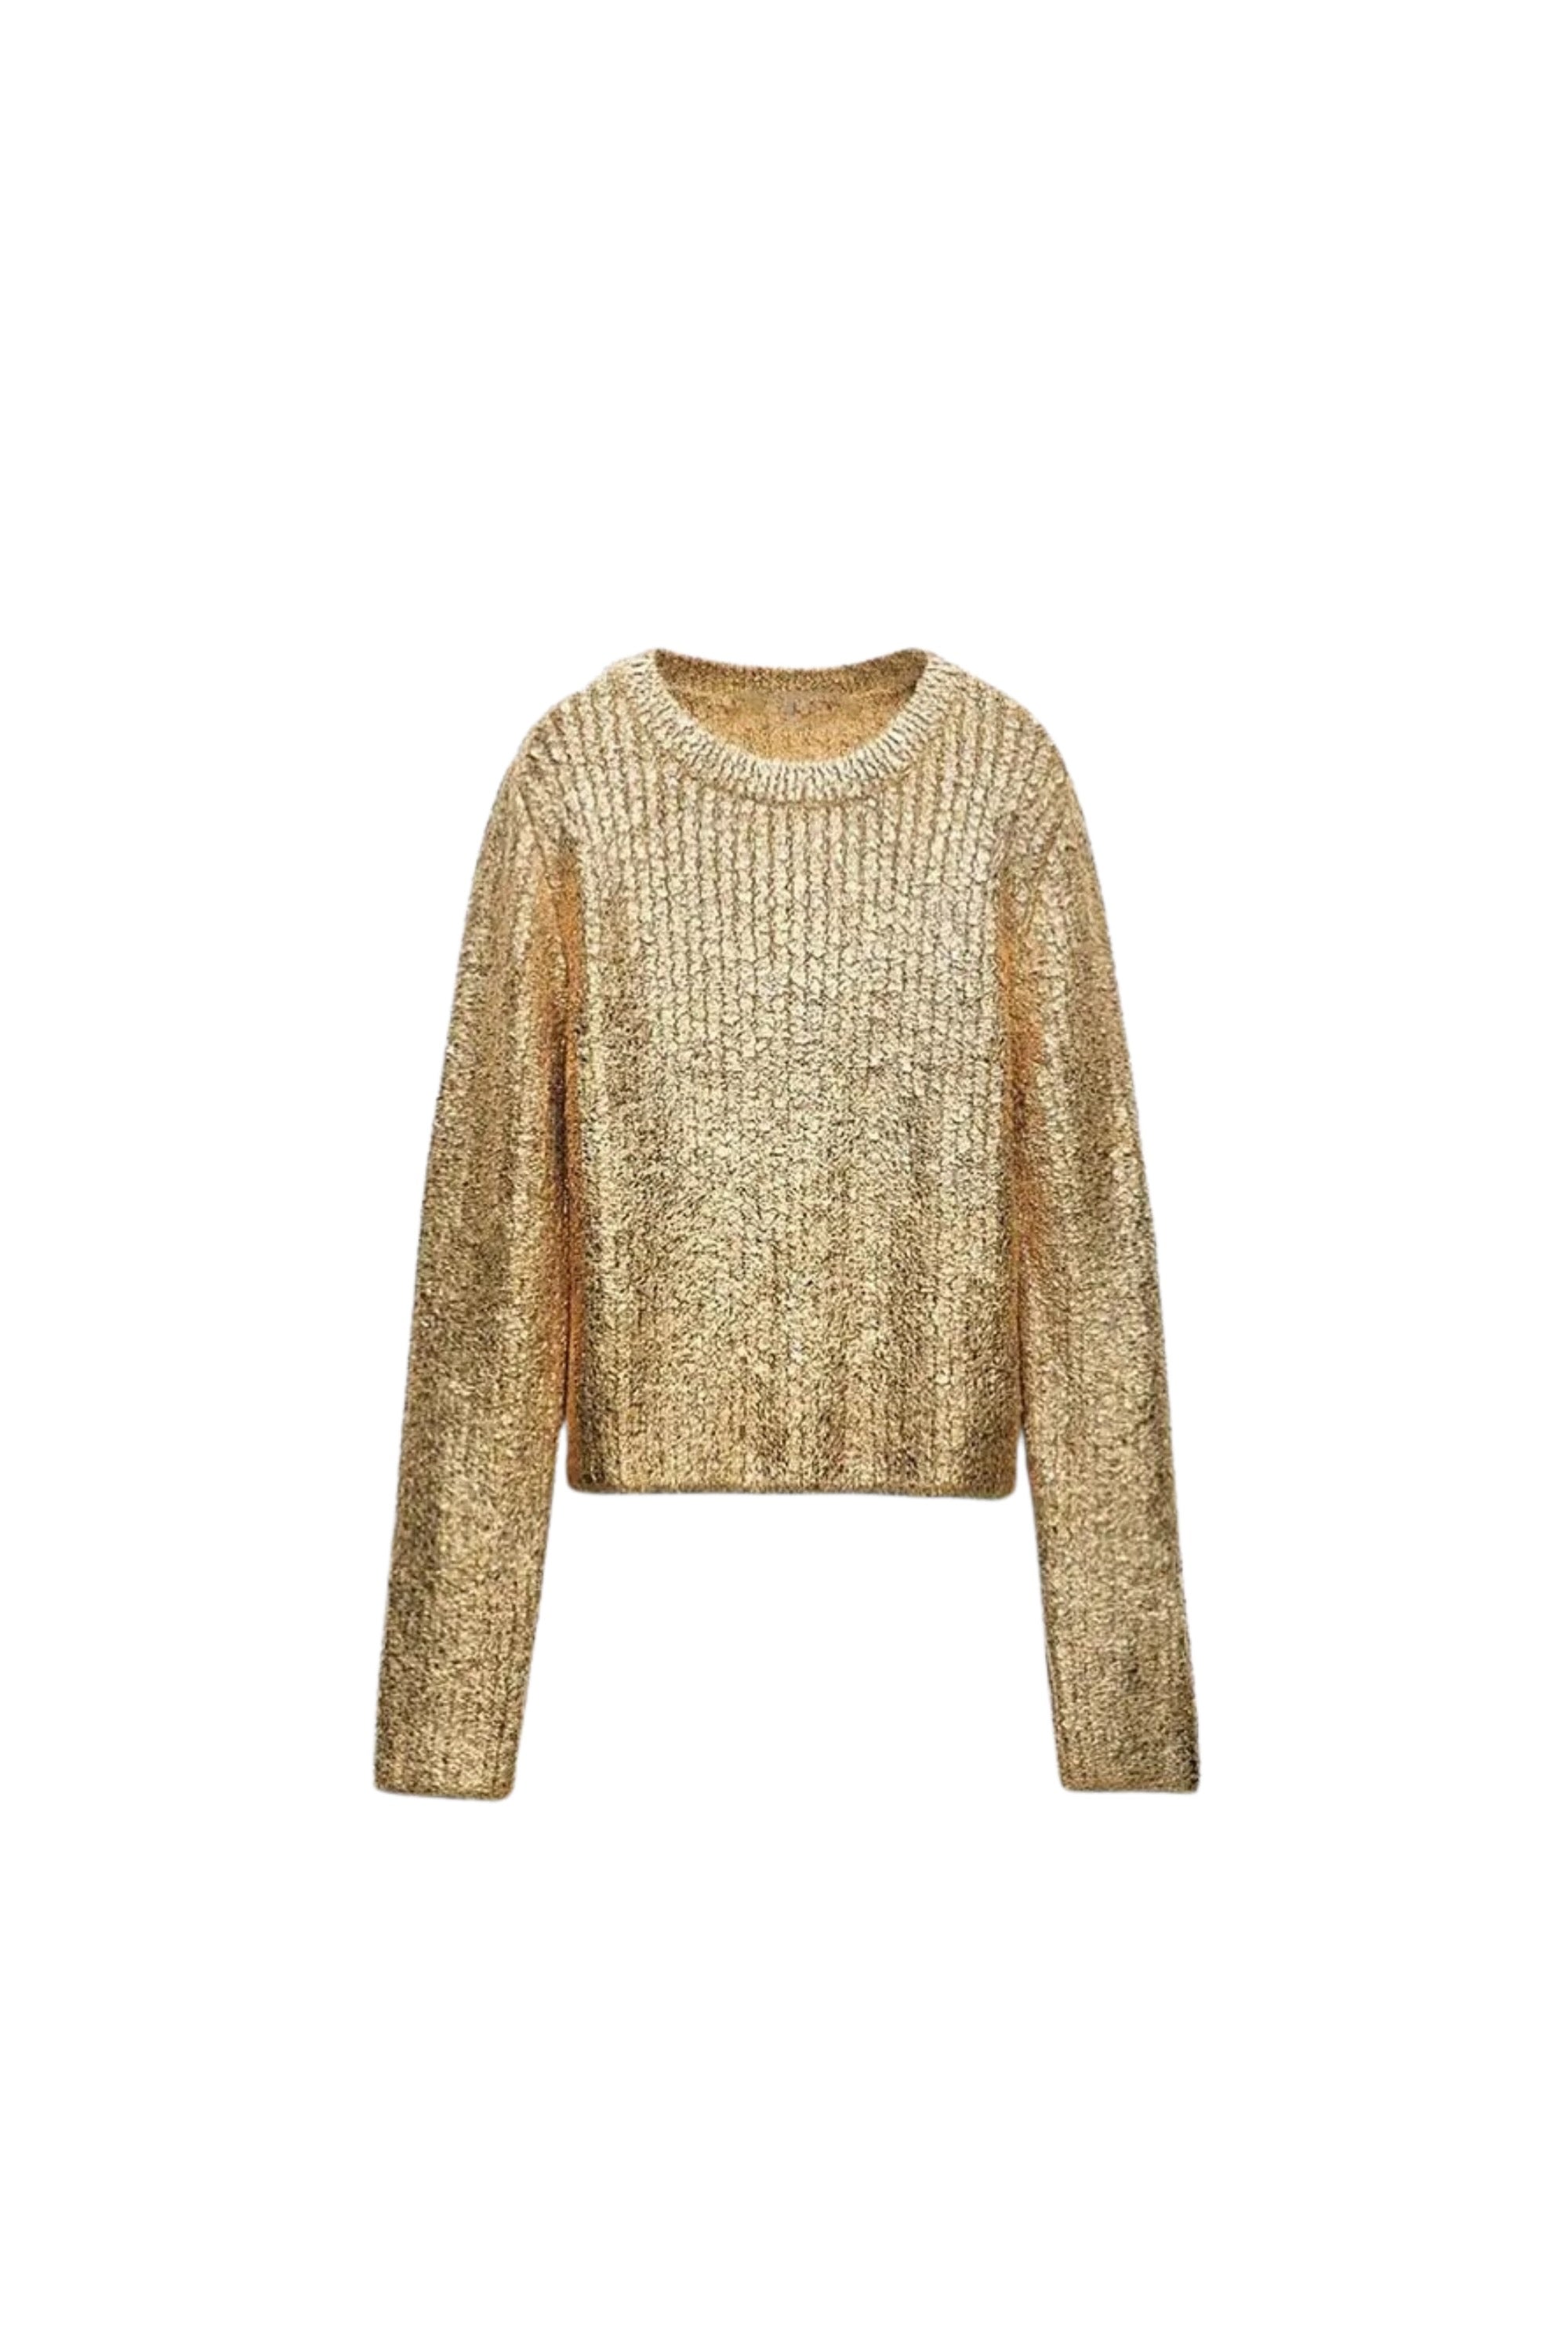 GOLDxTEAL painted metallic gold sweater.